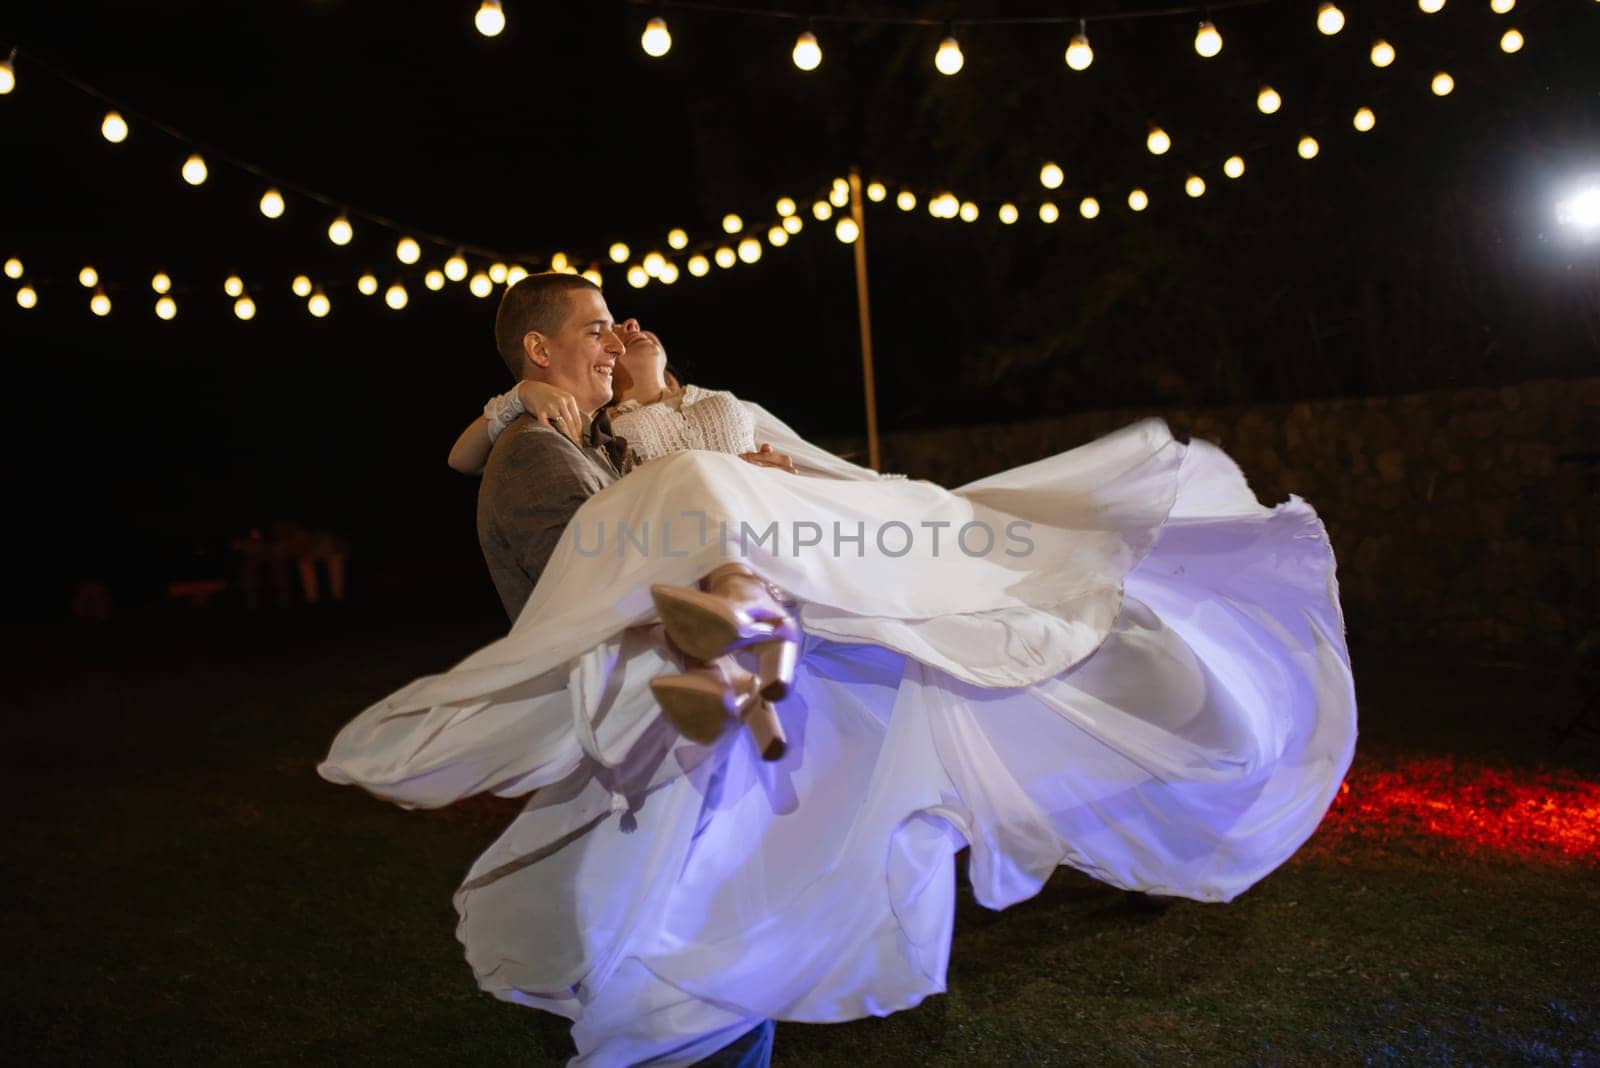 the first wedding dance of the bride and groom by Andreua